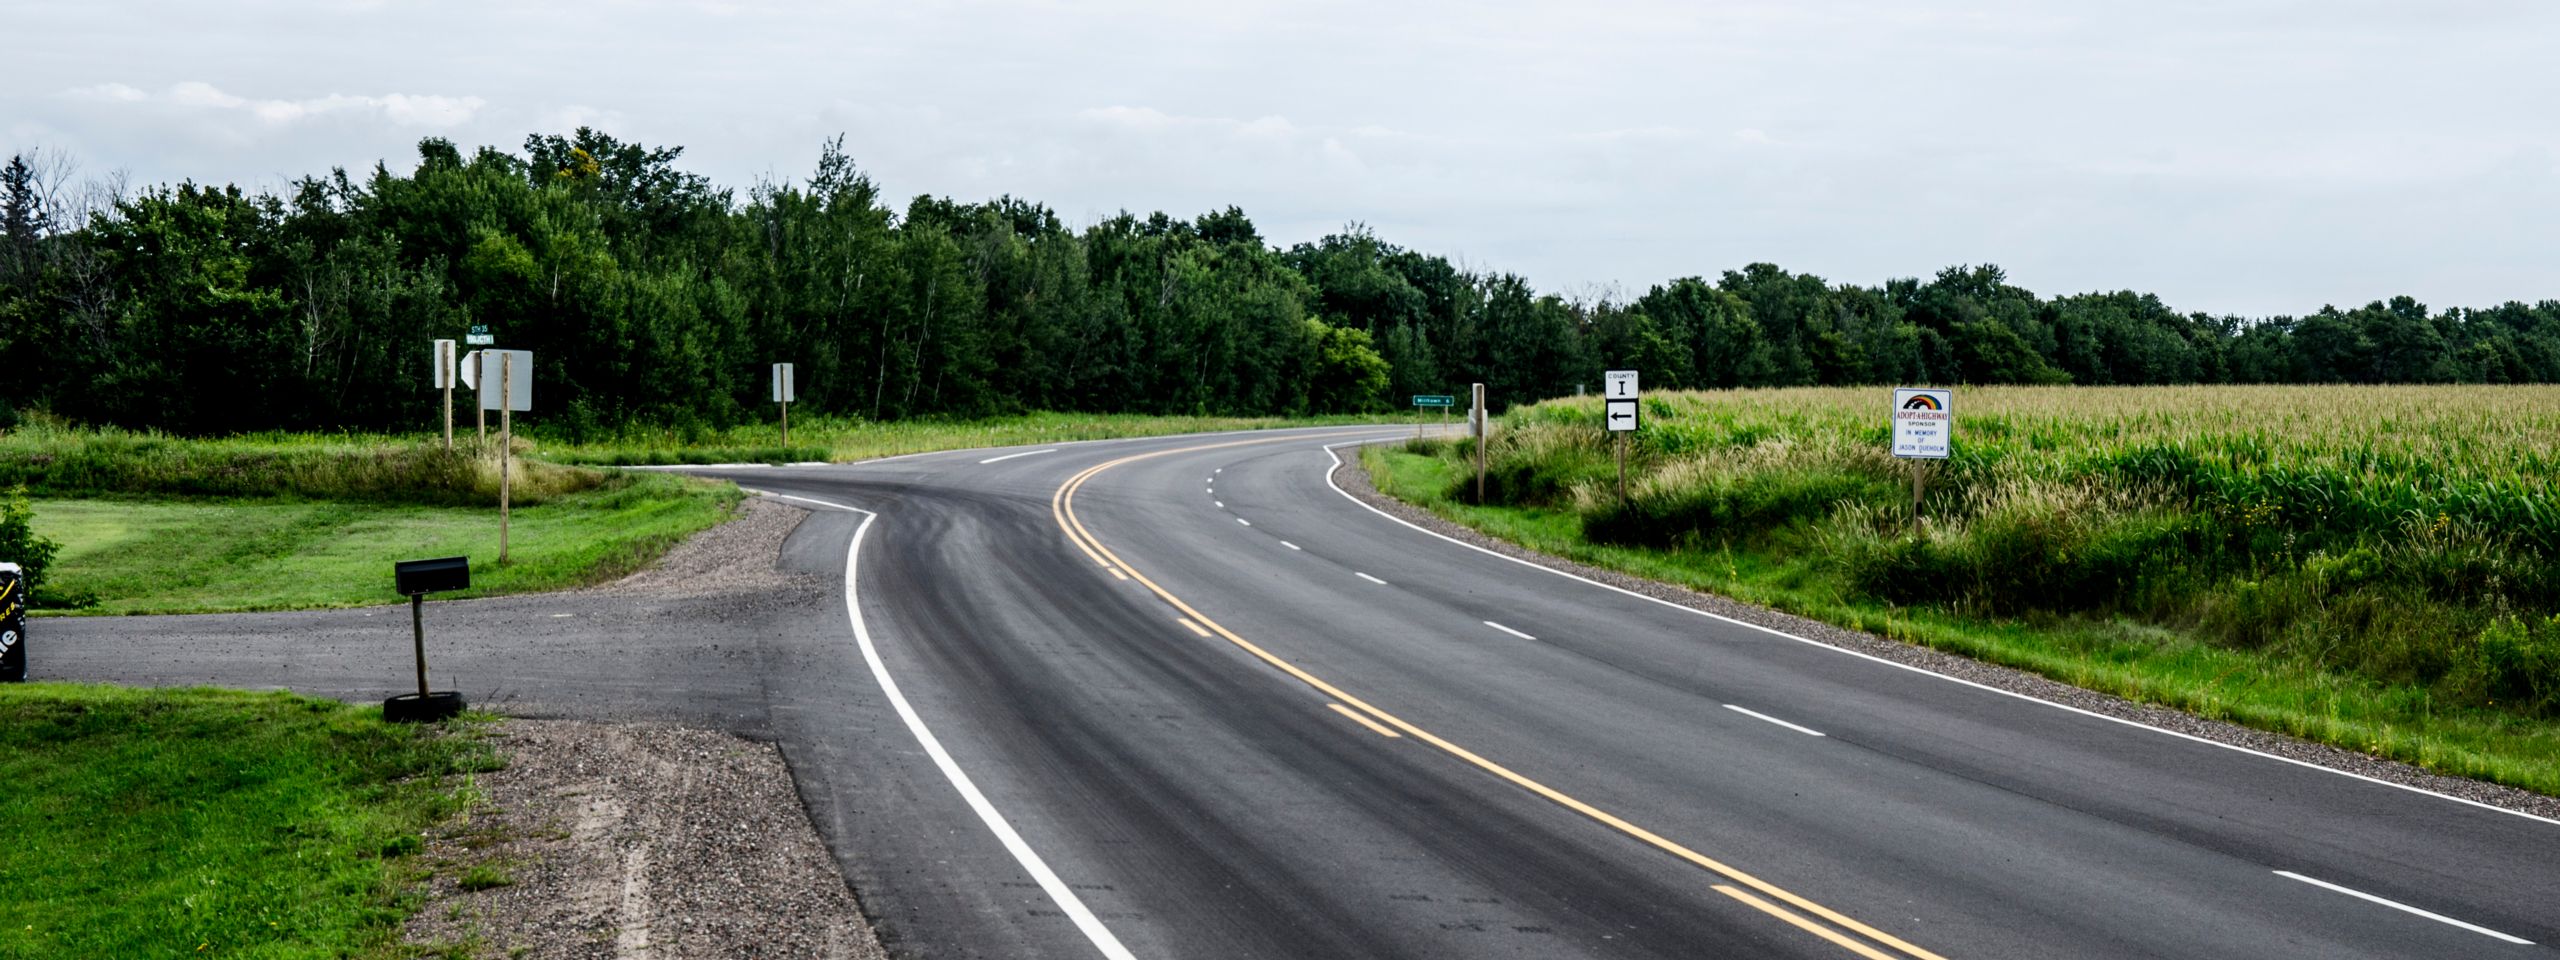 Road and Highway Design and Engineering Services